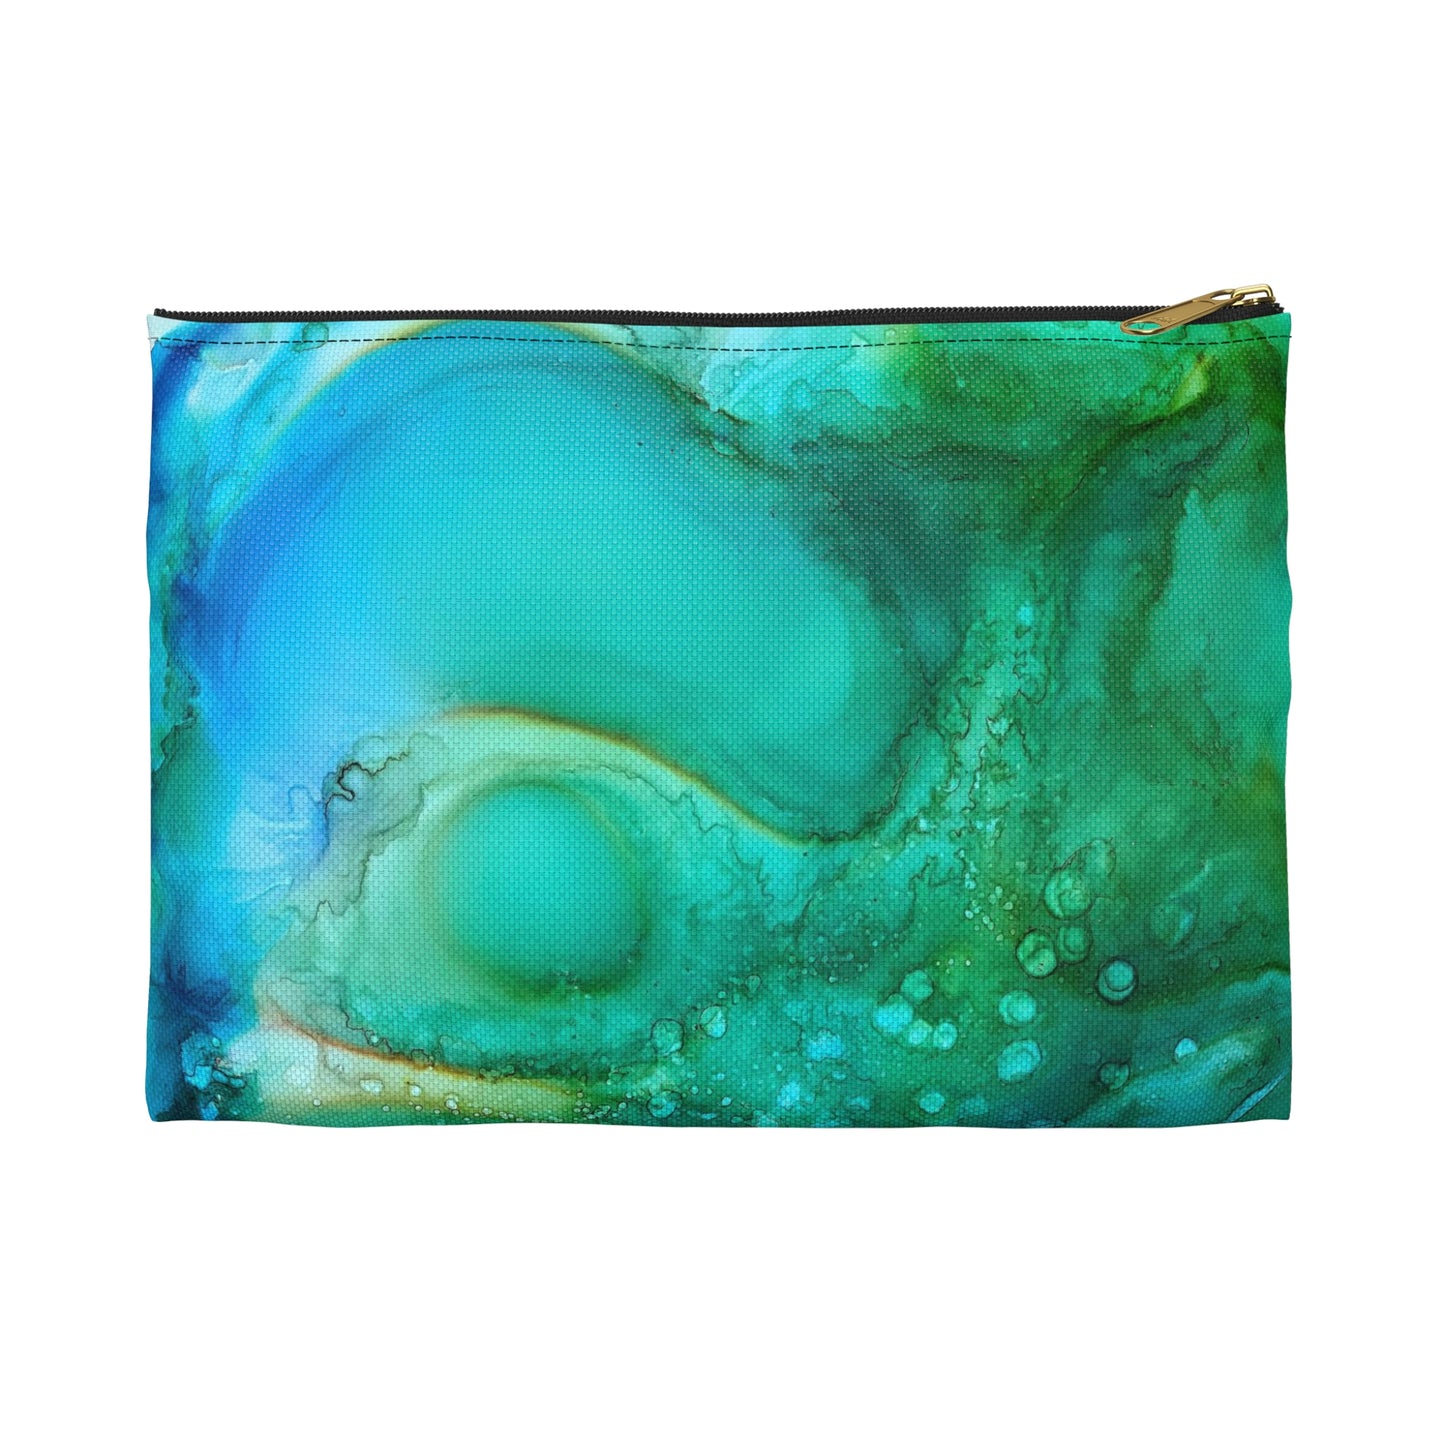 'Coventina' - Celtic Goddess Collection - Accessory Pouch